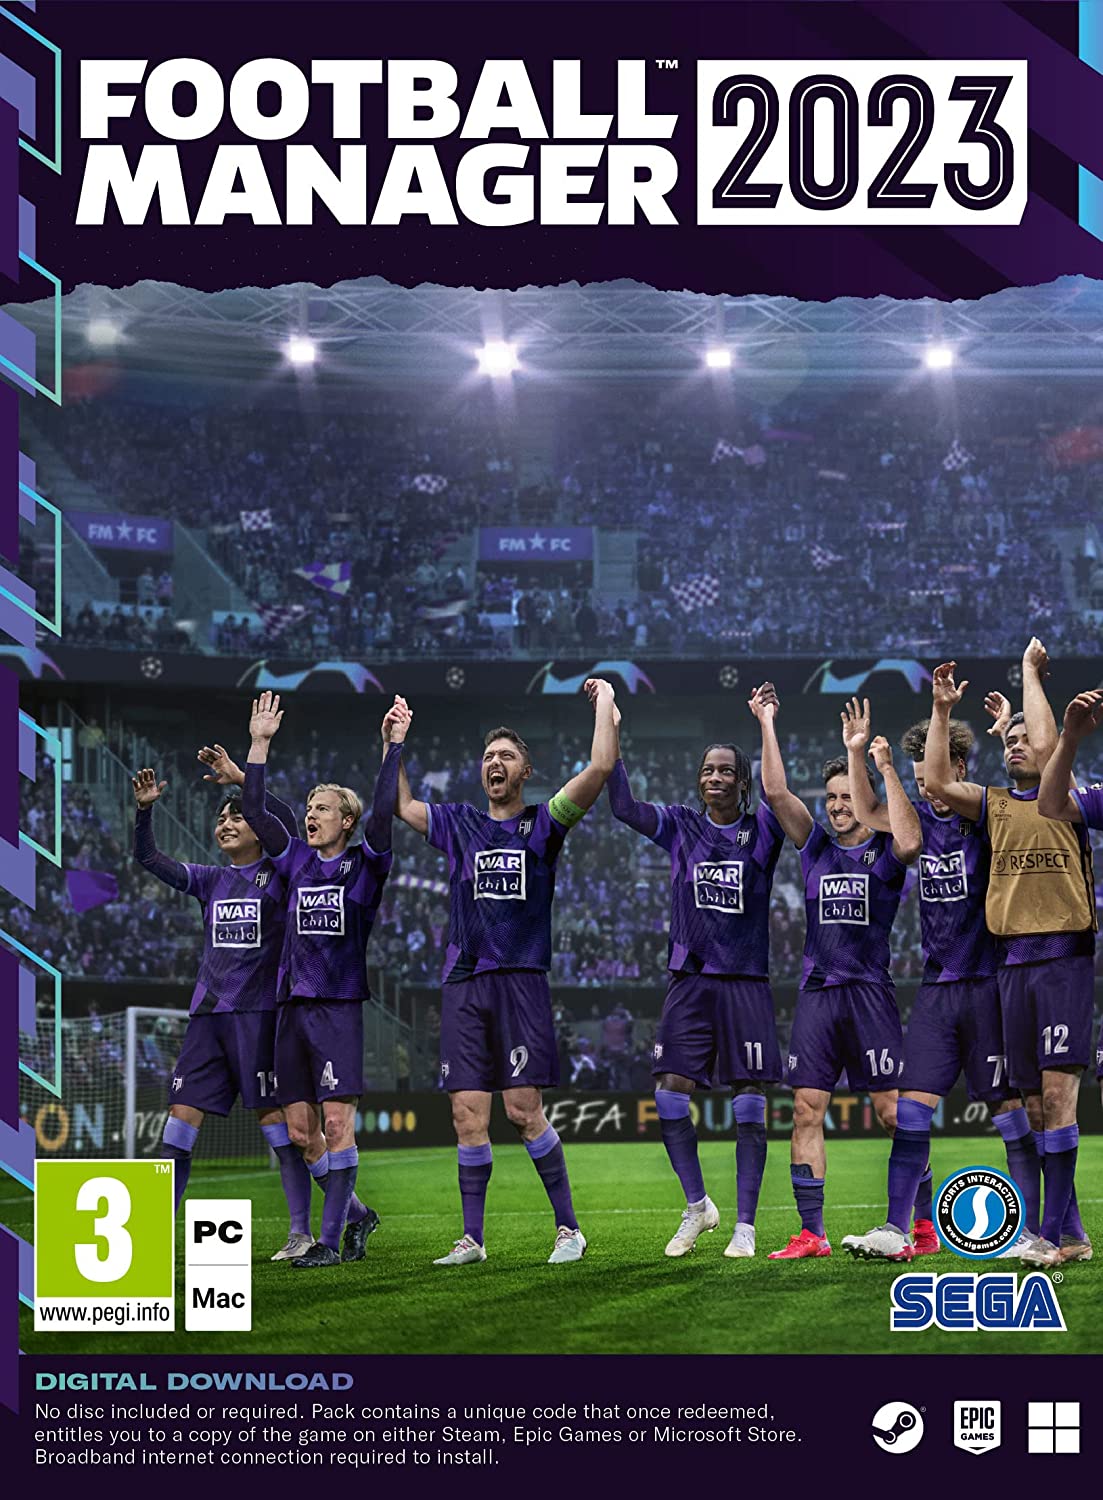 football manager 2022 xbox edition review